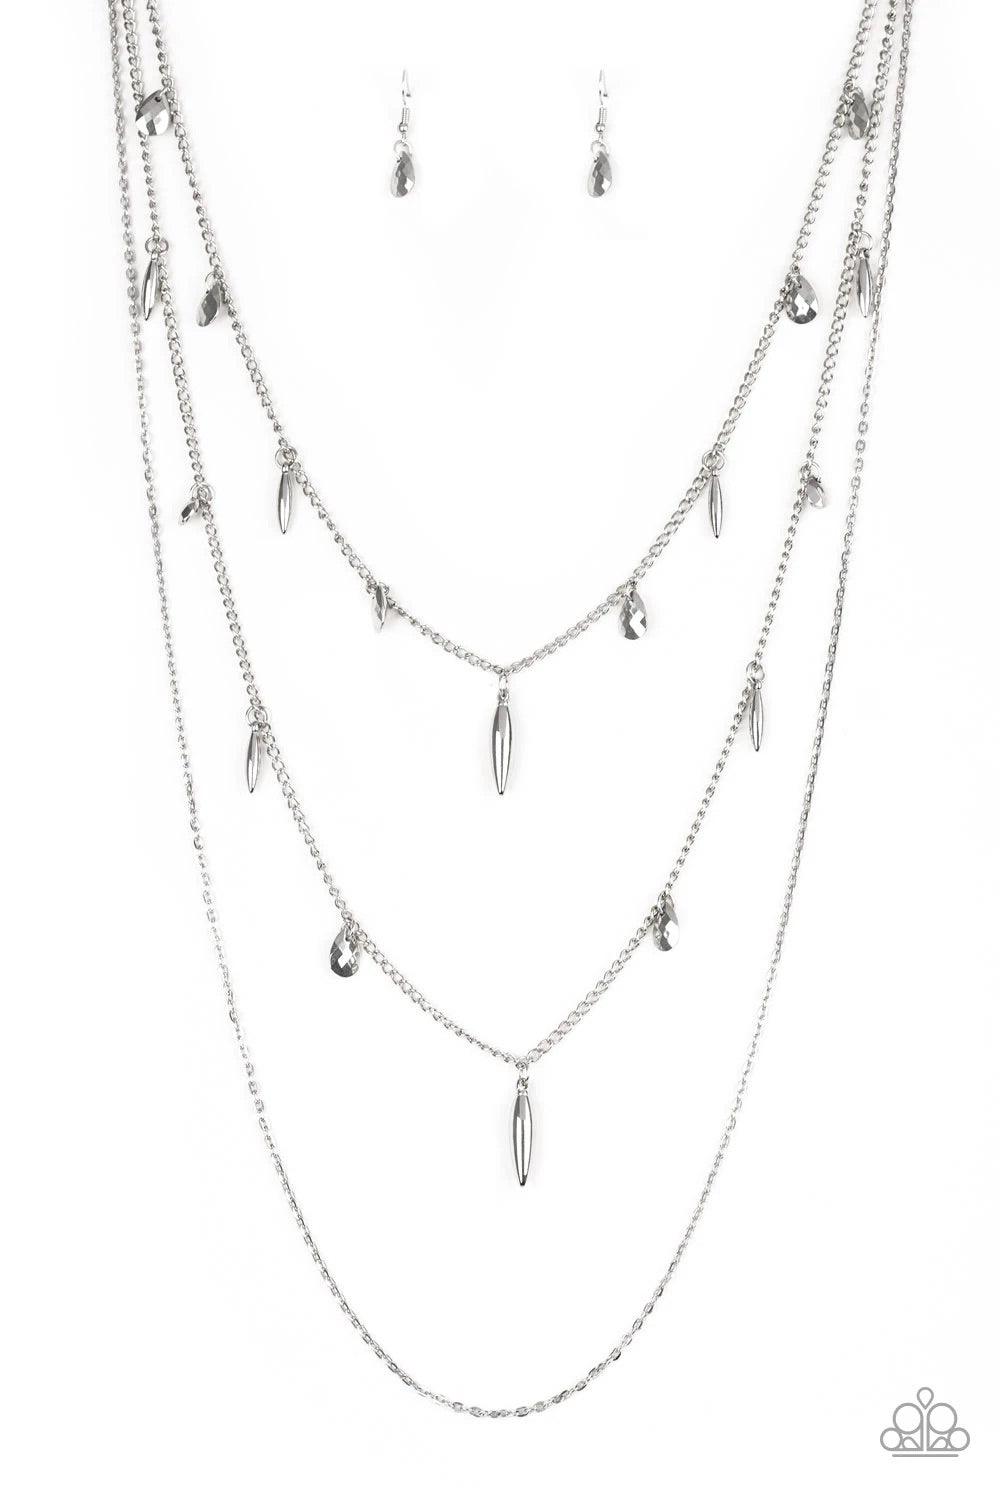 Paparazzi Accessories Bravo Bravado - Silver Mismatched silver chains layer down the chest. Faceted silver teardrops and shiny silver accents swing from two of the shimmery silver chains for an edgy finish. Features an adjustable clasp closure. Sold as on